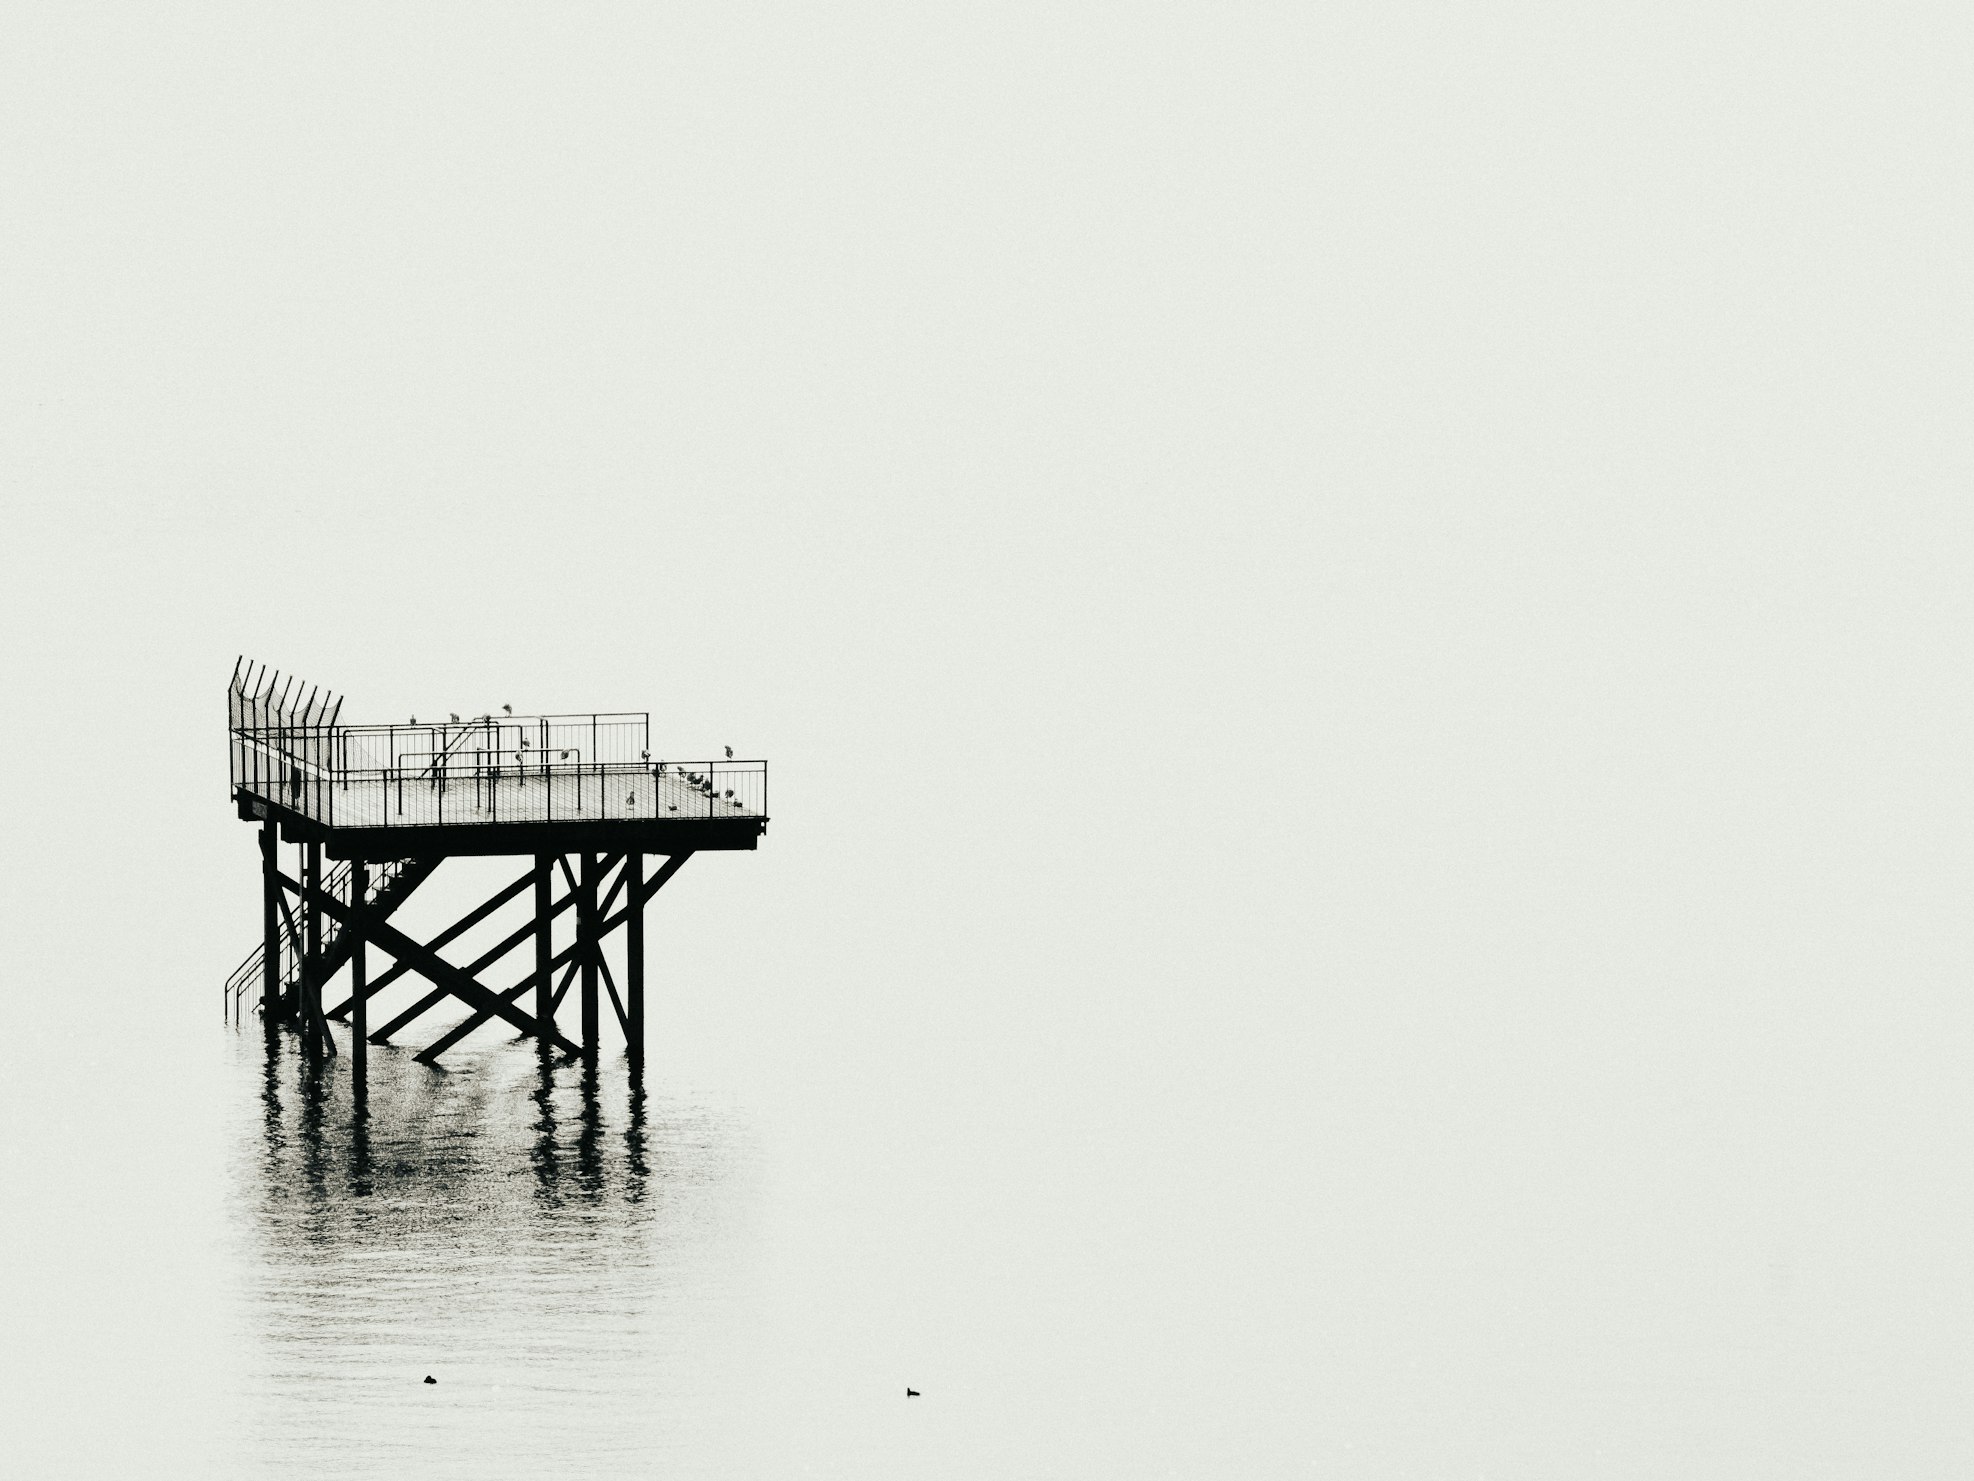 Silhouette of Dock against white sea background